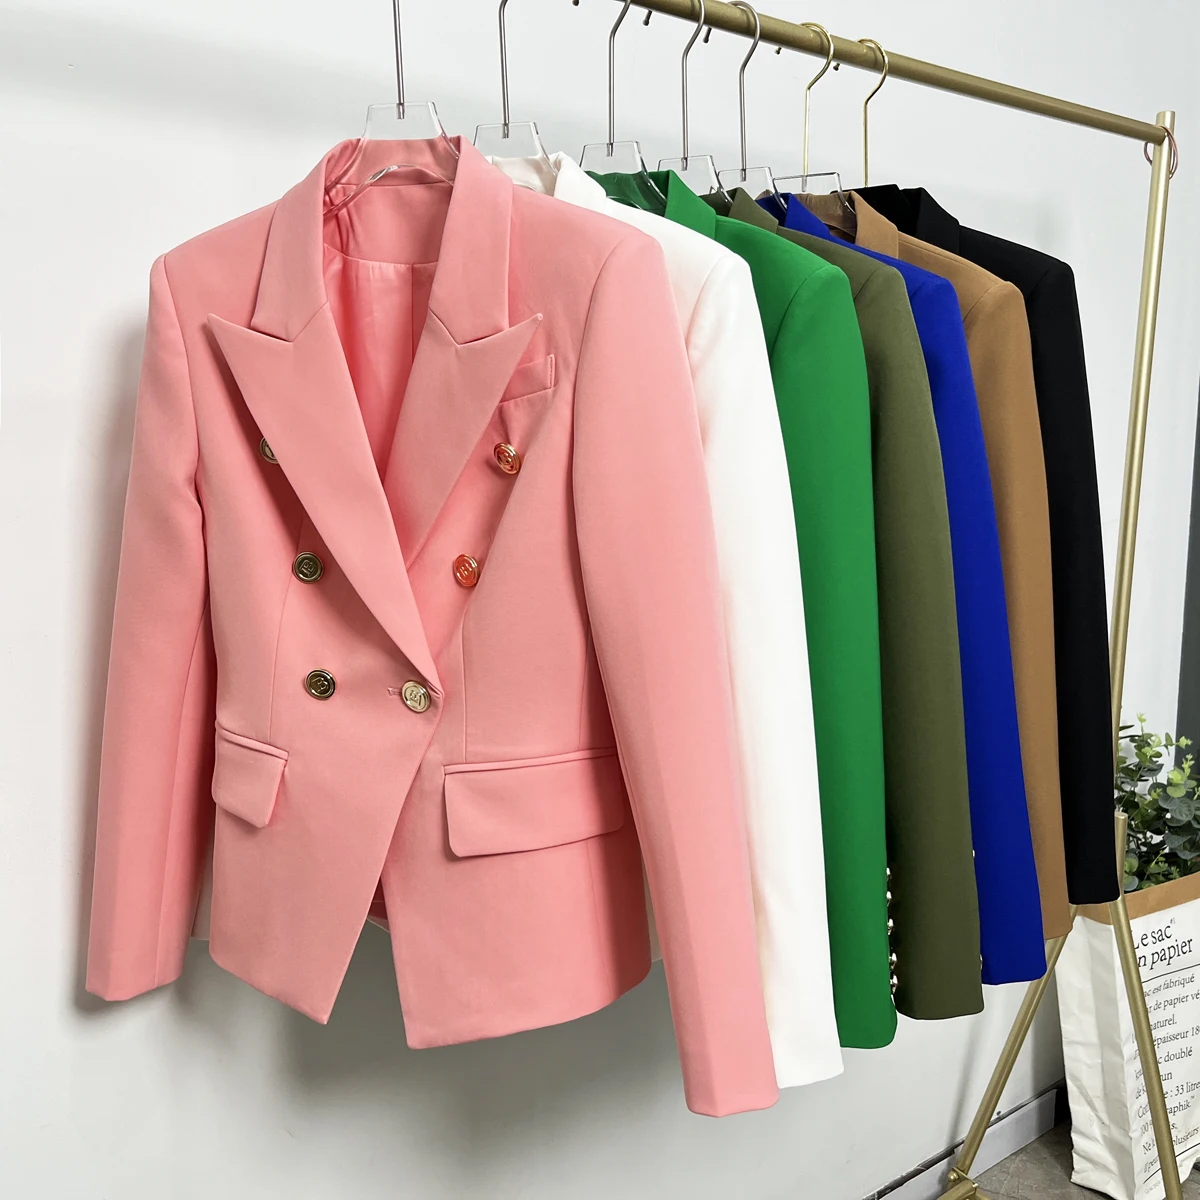 2022 Spring Autumn New Suit Jacket Fashionable And Popular Slimming All-match Simple Commuter Classic Small Suit Women's Blazer